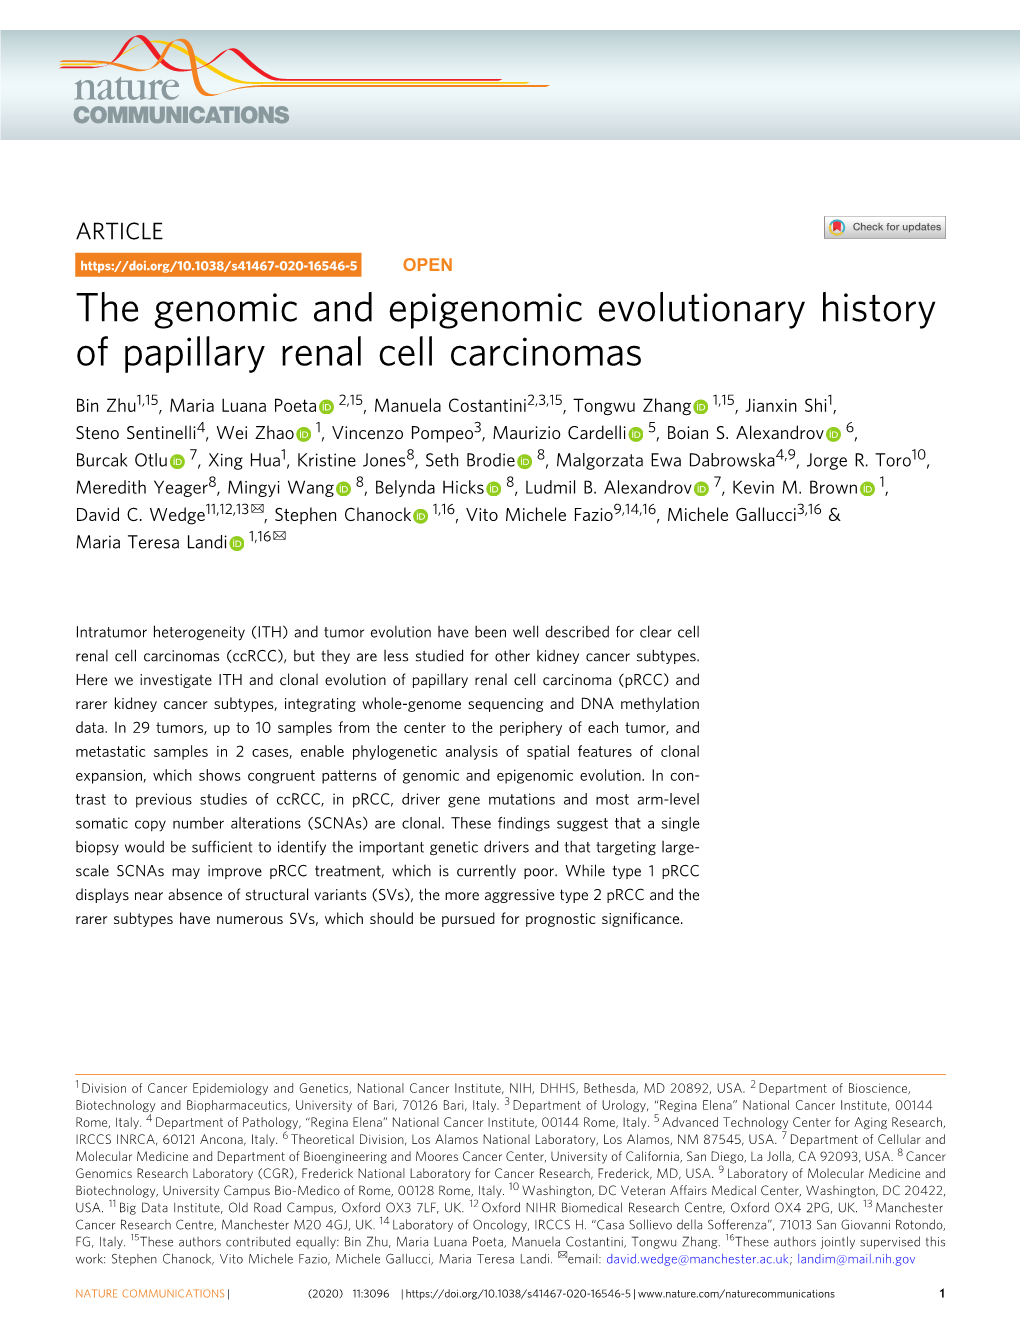 The Genomic and Epigenomic Evolutionary History of Papillary Renal Cell Carcinomas